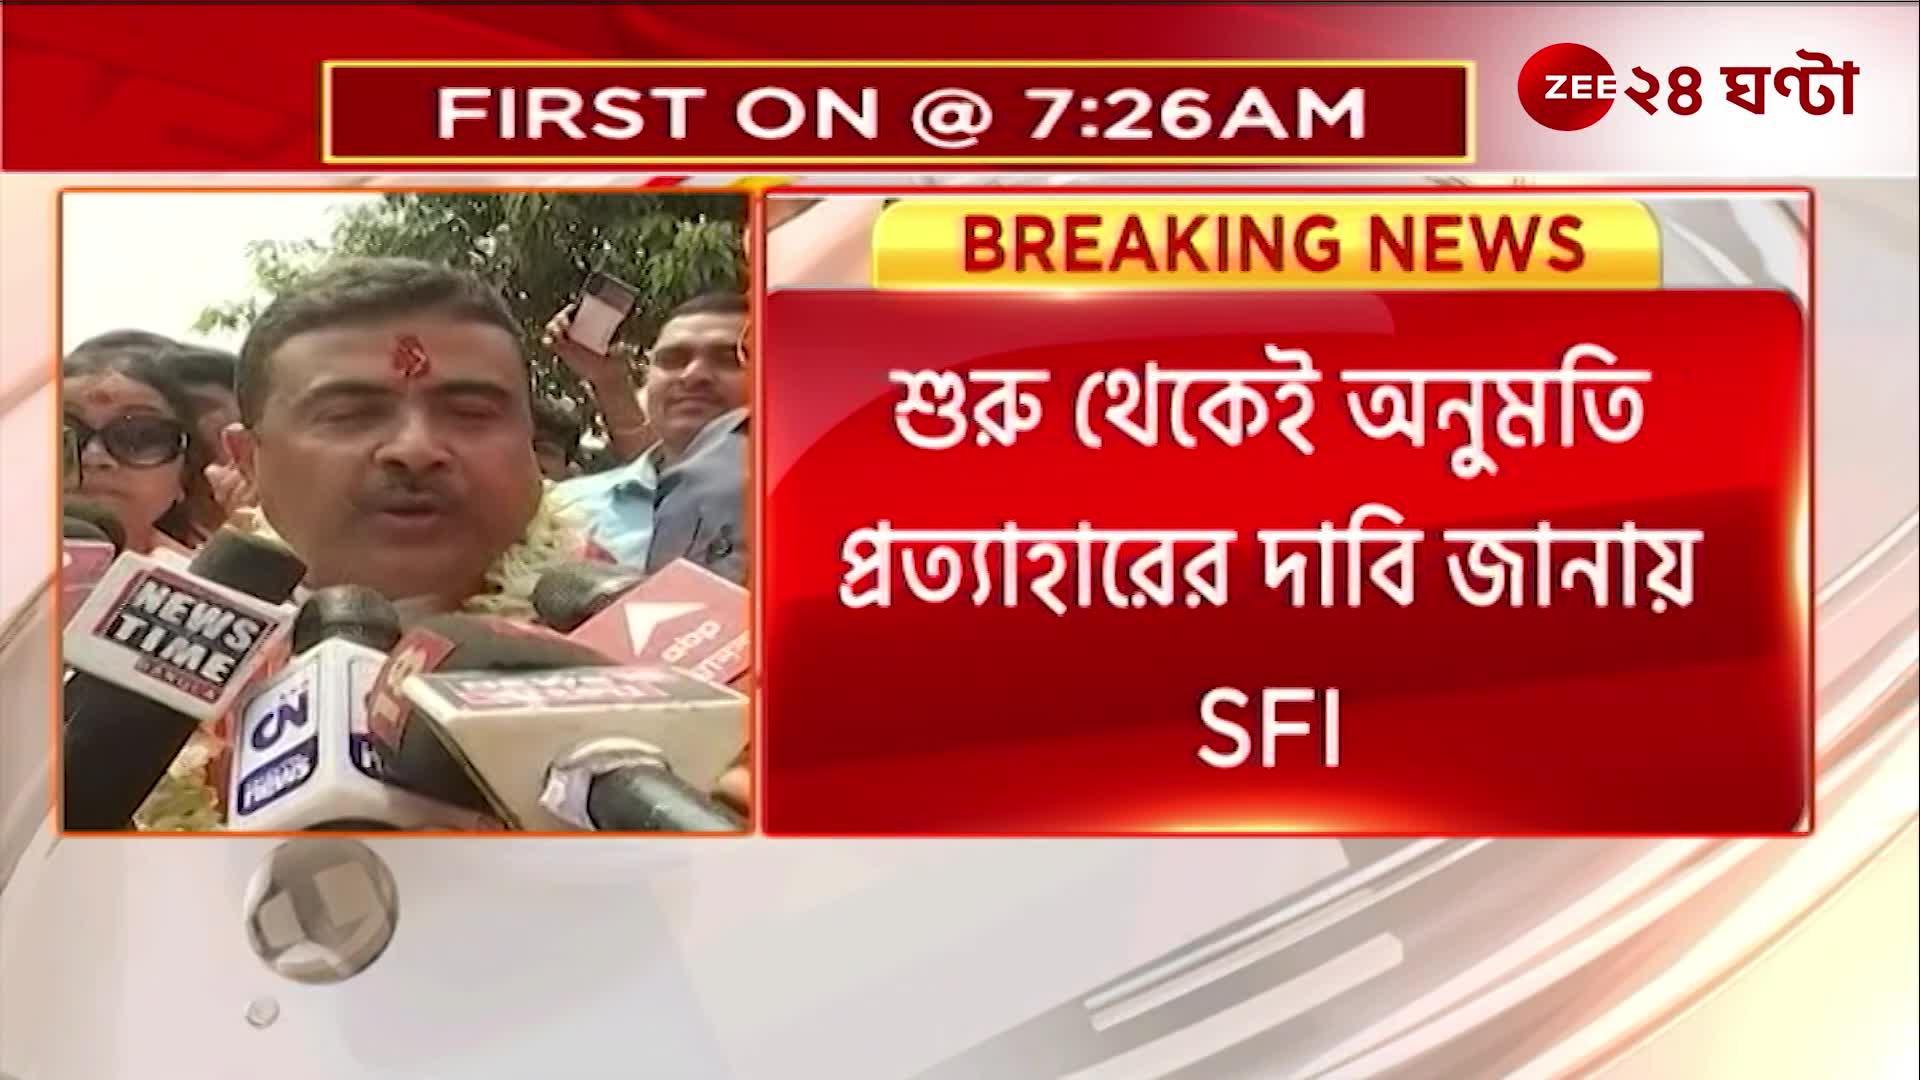 Jadavpur University authorities withdrew permission to celebrate Ram Navami after a day of tension